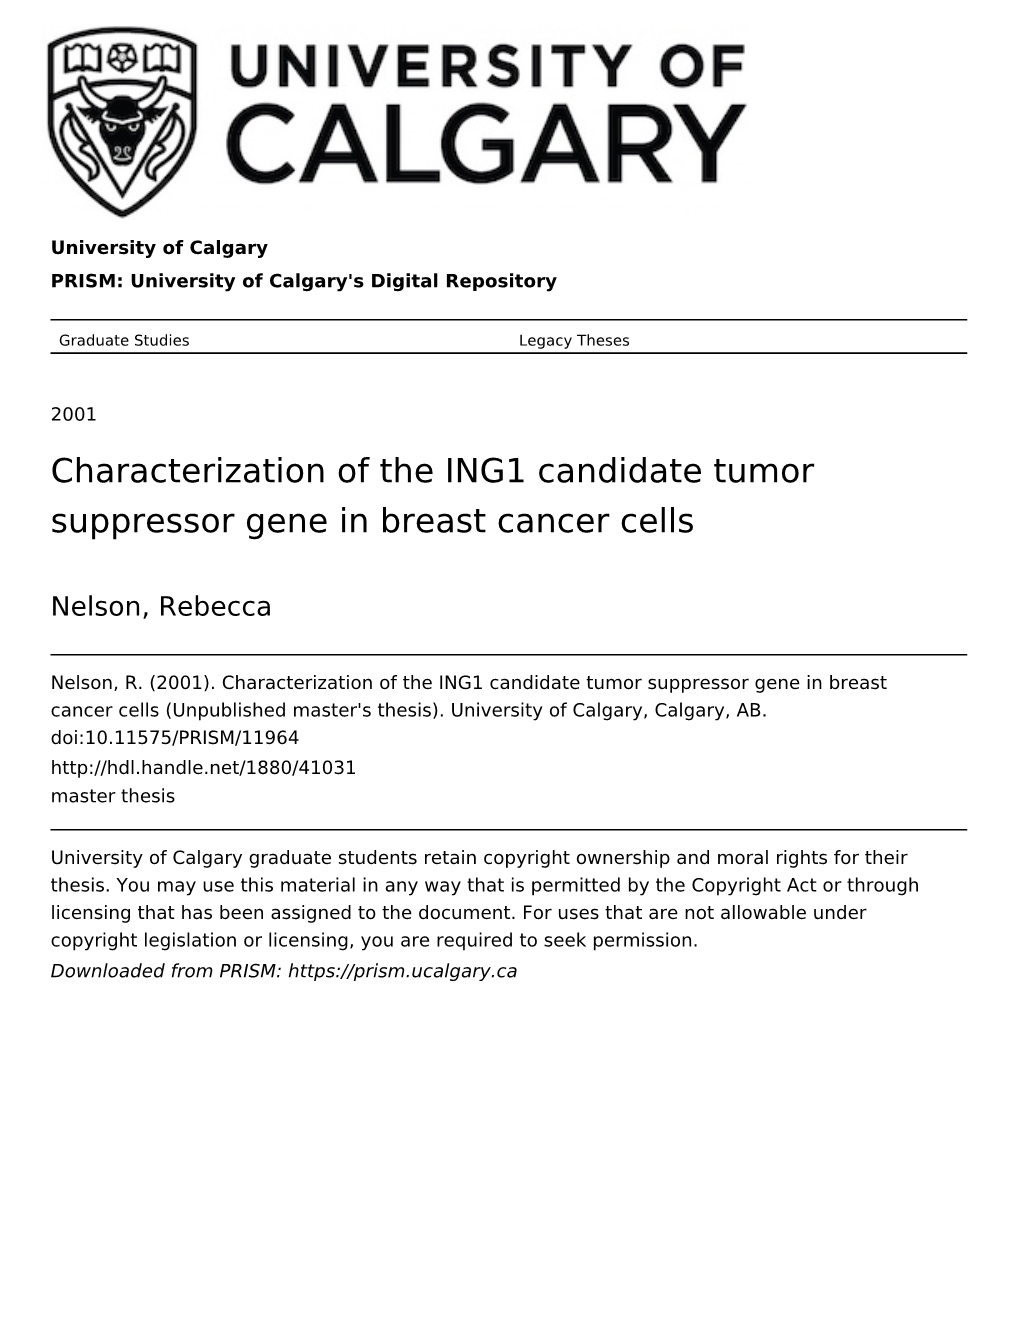 Characterization of the ING1 Candidate Tumor Suppressor Gene in Breast Cancer Cells